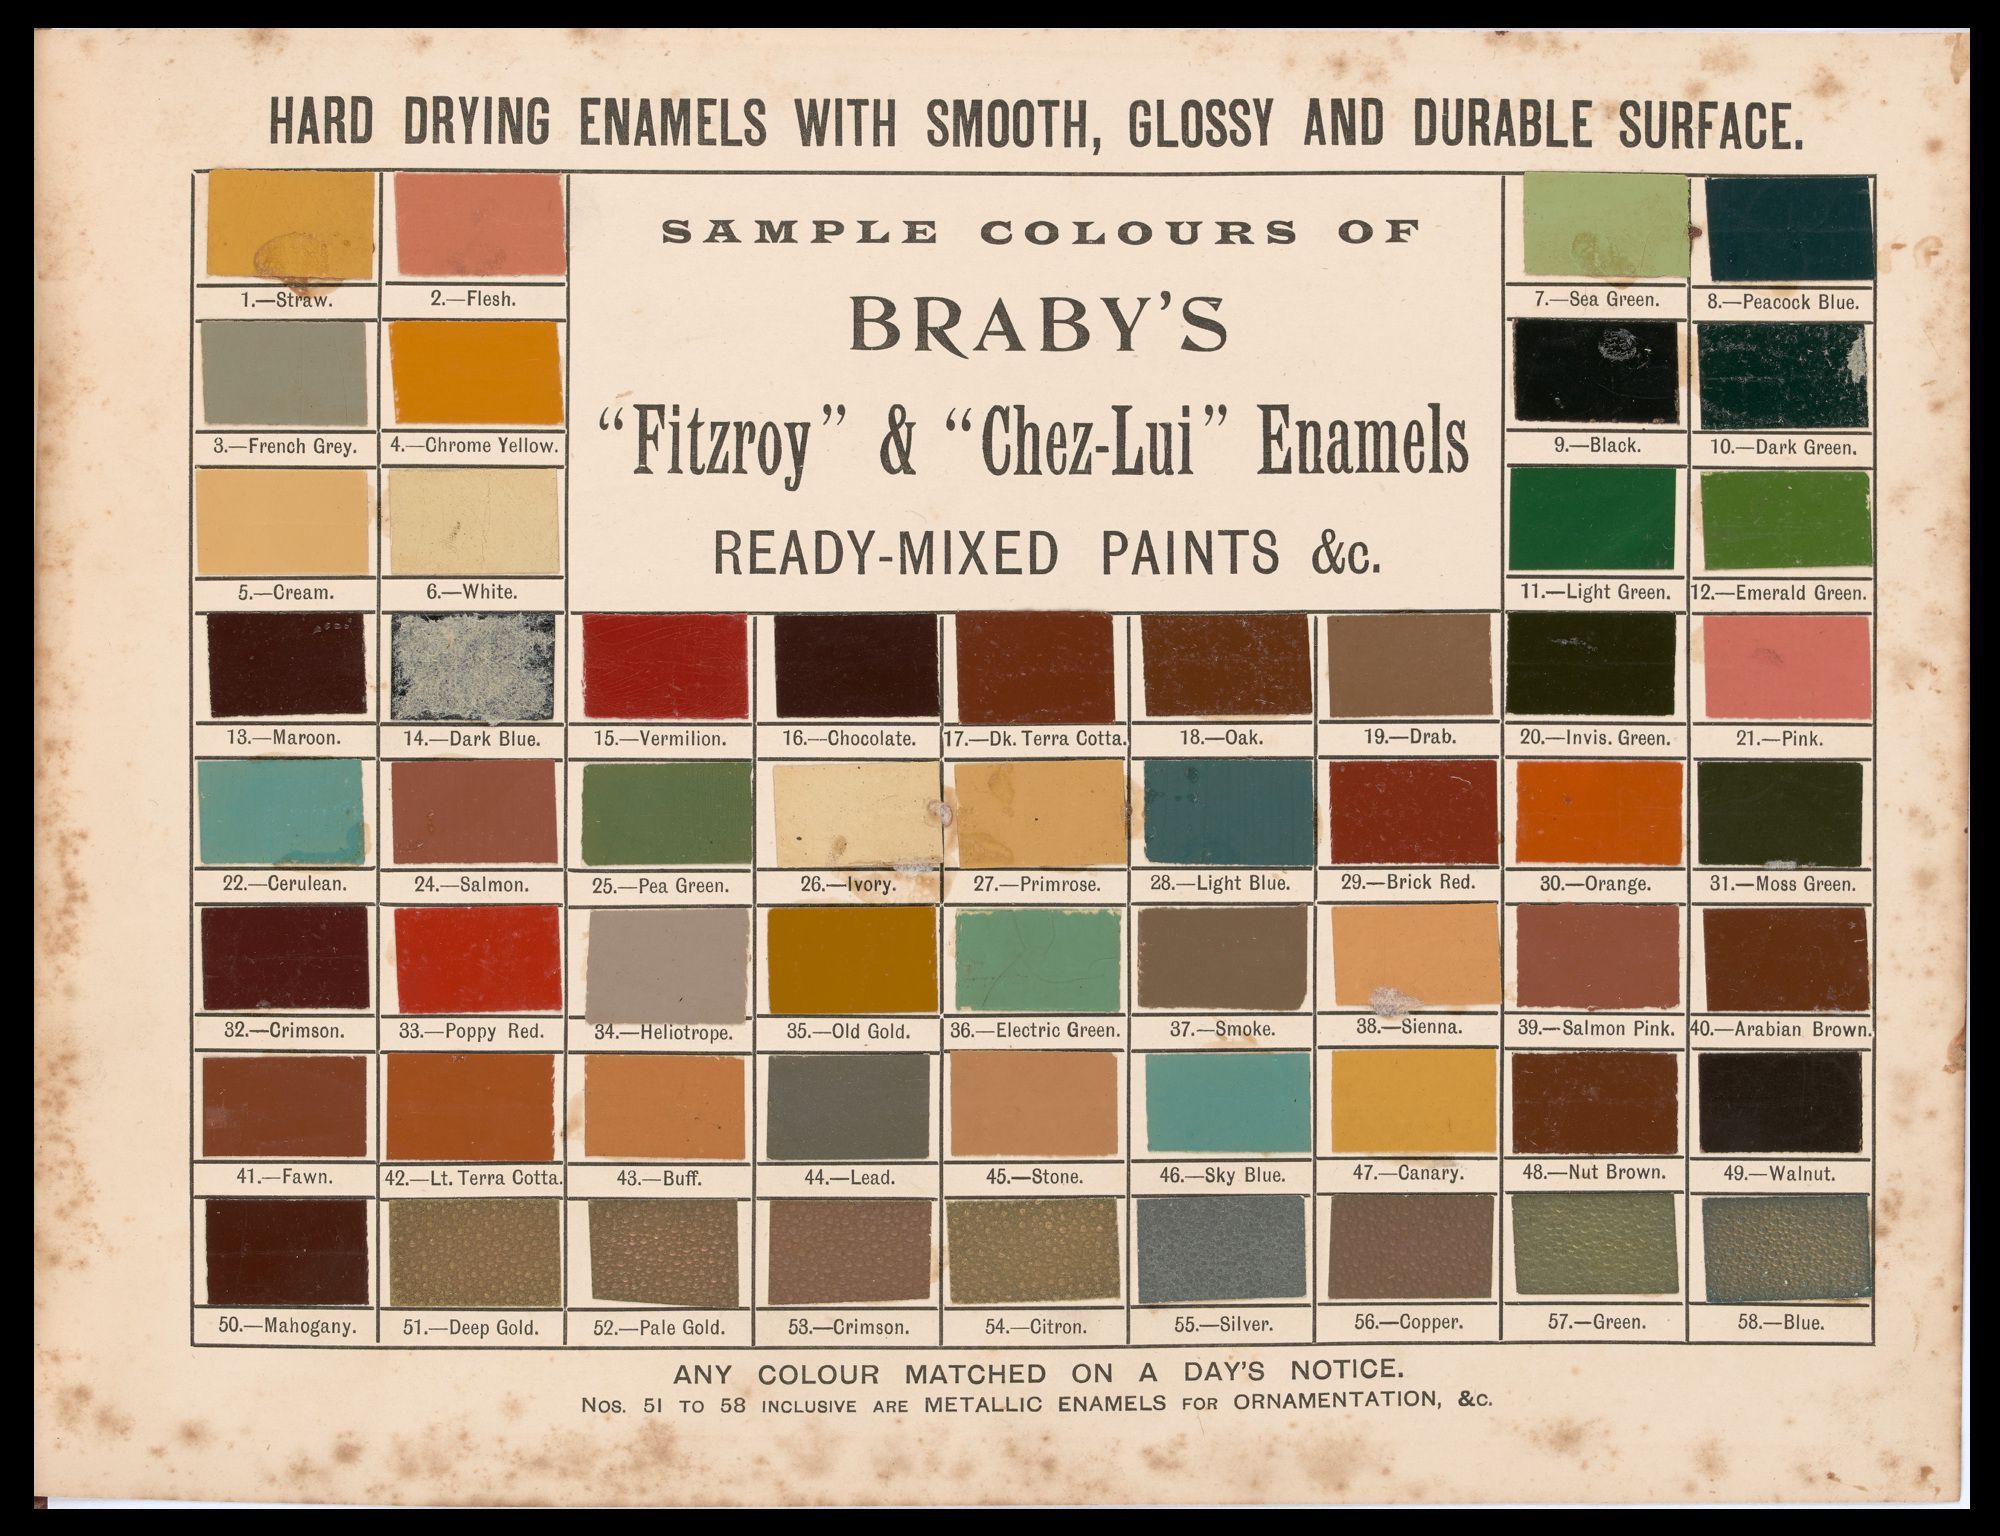 A colour chart of ready-mixed paints